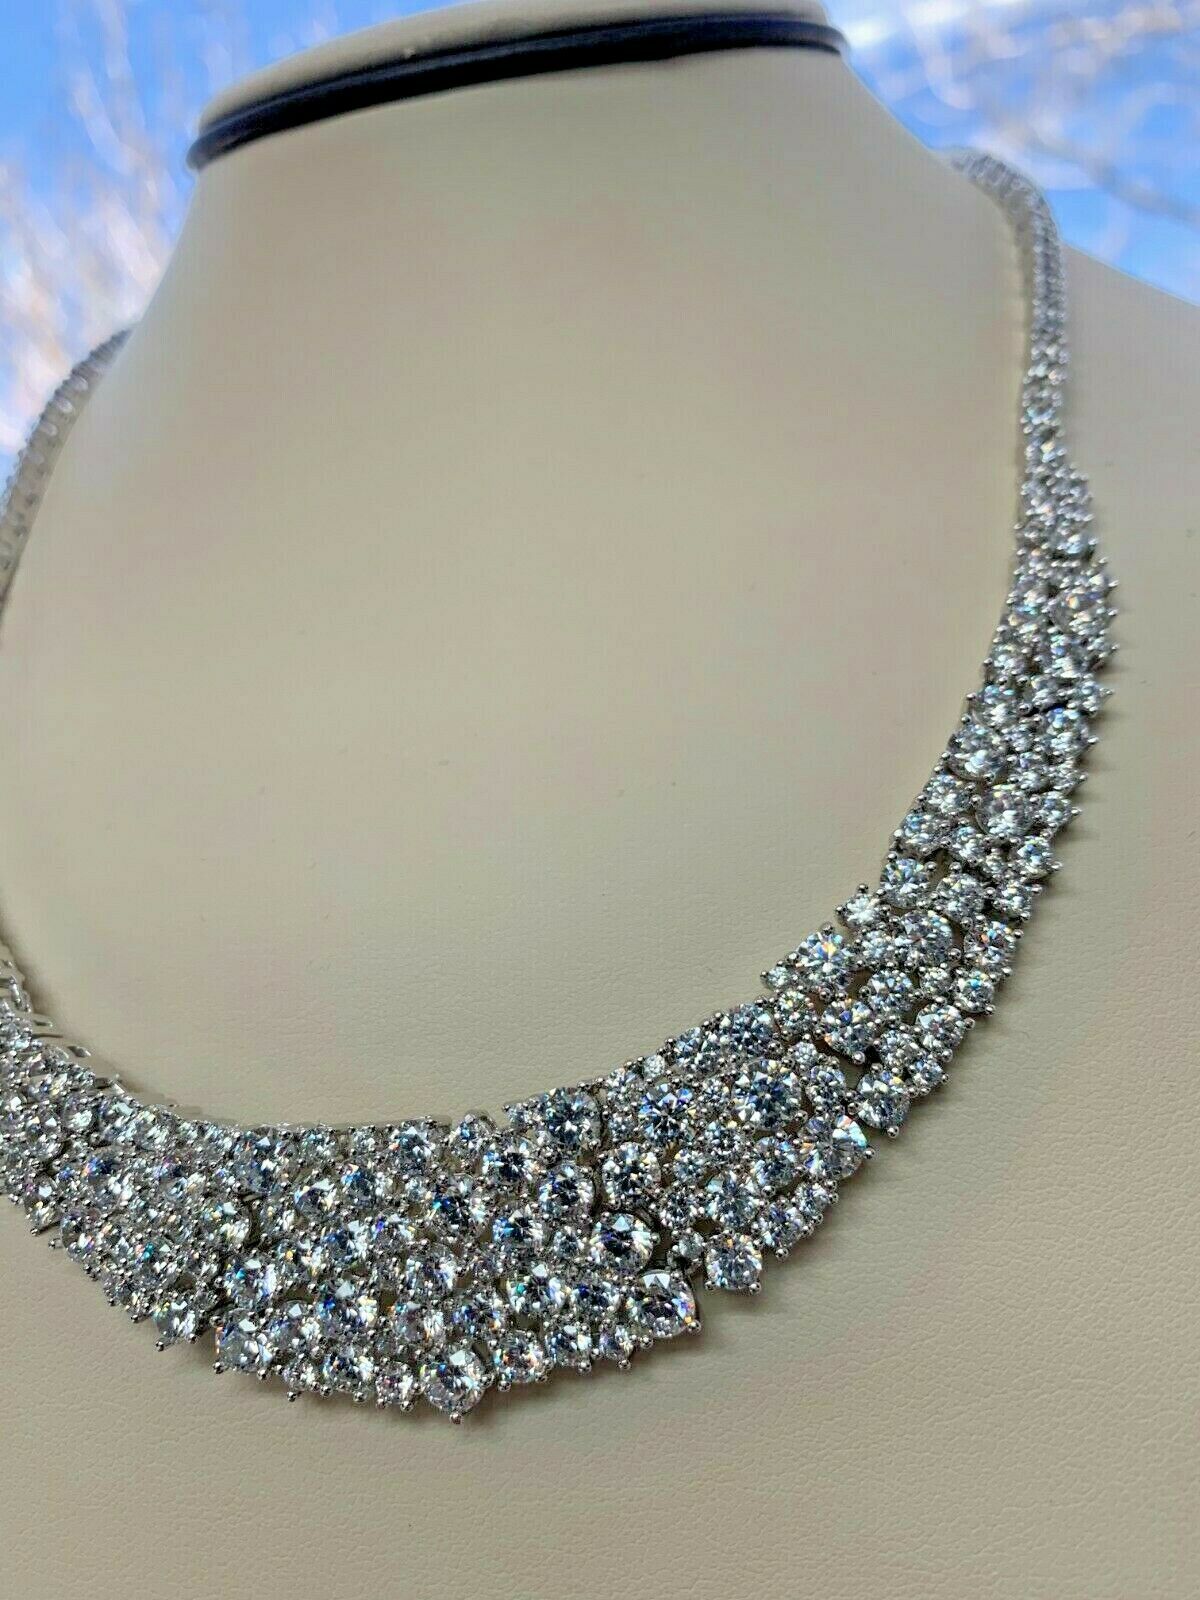 Absolute 18" Sterling Silver Cubic Zirconia Tapered Bib Necklace - HSNIntroducing the Absolute 18" Sterling Silver Cubic Zirconia Tapered Bib Necklace from HSN, a masterpiece of elegance and glamour that's bound to captivate.
Key FeatuJewelry & Watches:Fine Jewelry:Fine Necklaces & Pendants:GemstoneAbsolute 18" Sterling Silver Cubic Zirconia Tapered Bib Necklace - HSN $600Duhaas